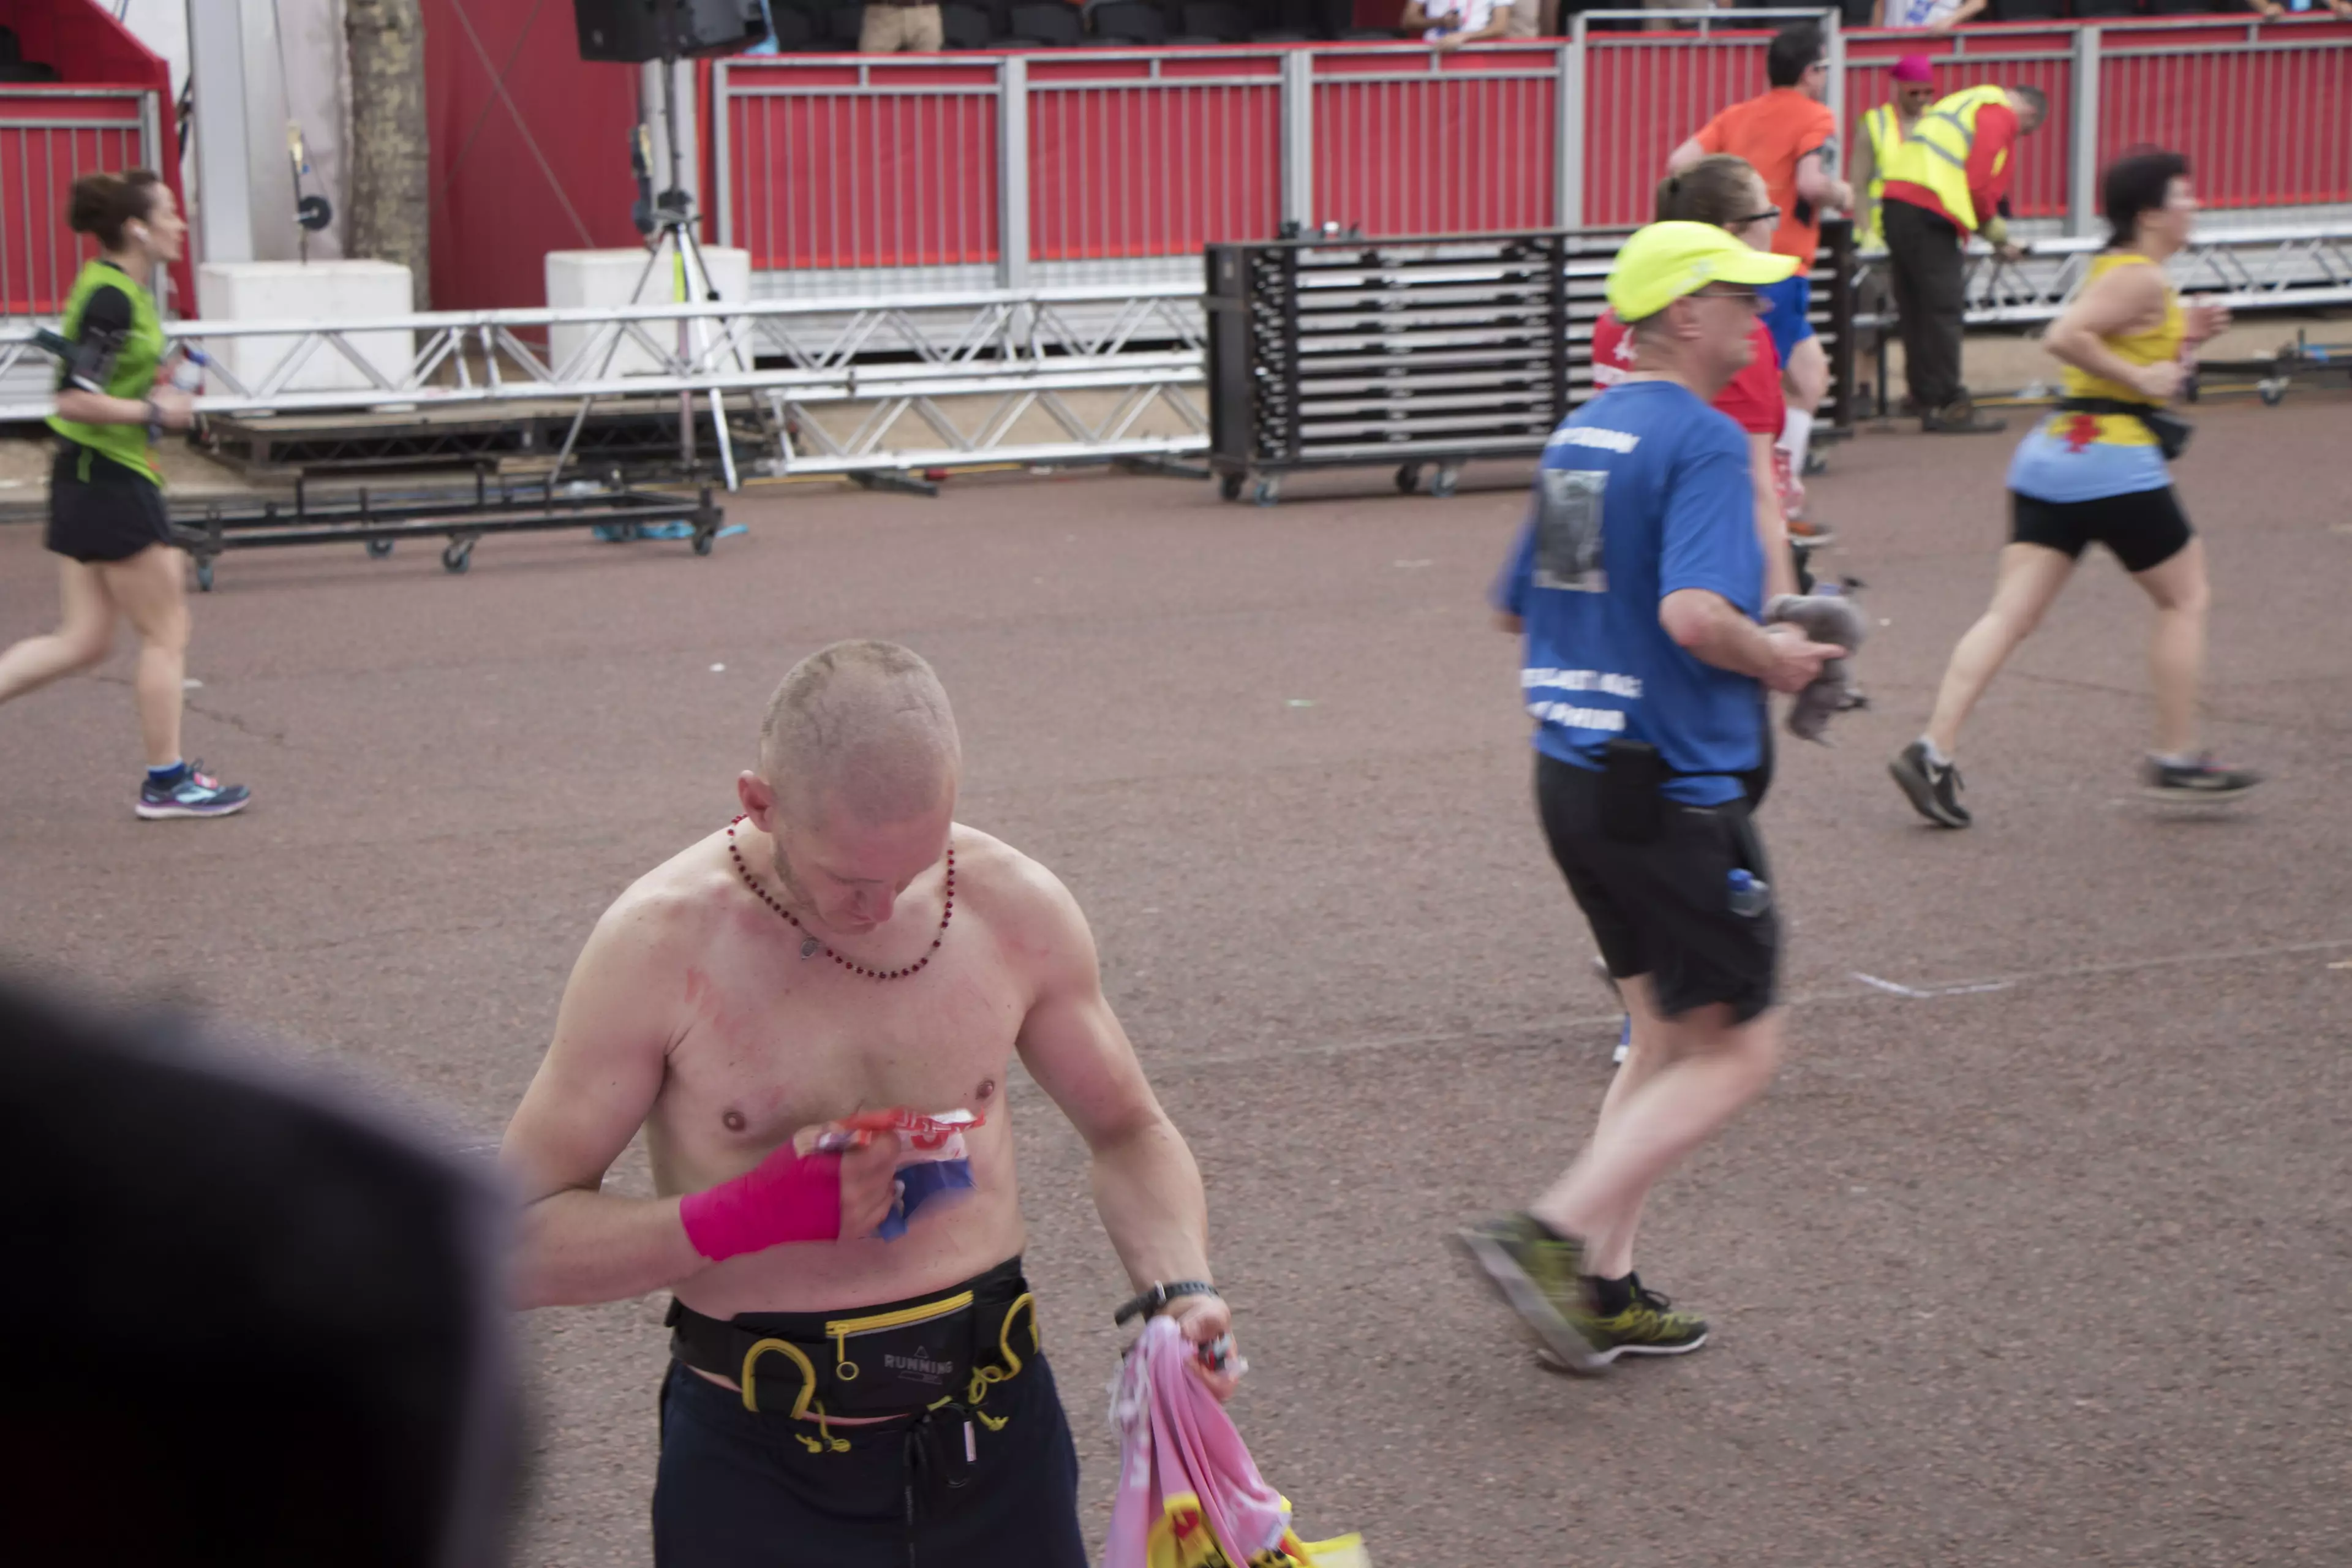 Man Allegedly Stole Another Runner’s Bib For London Marathon And Took His Medal 